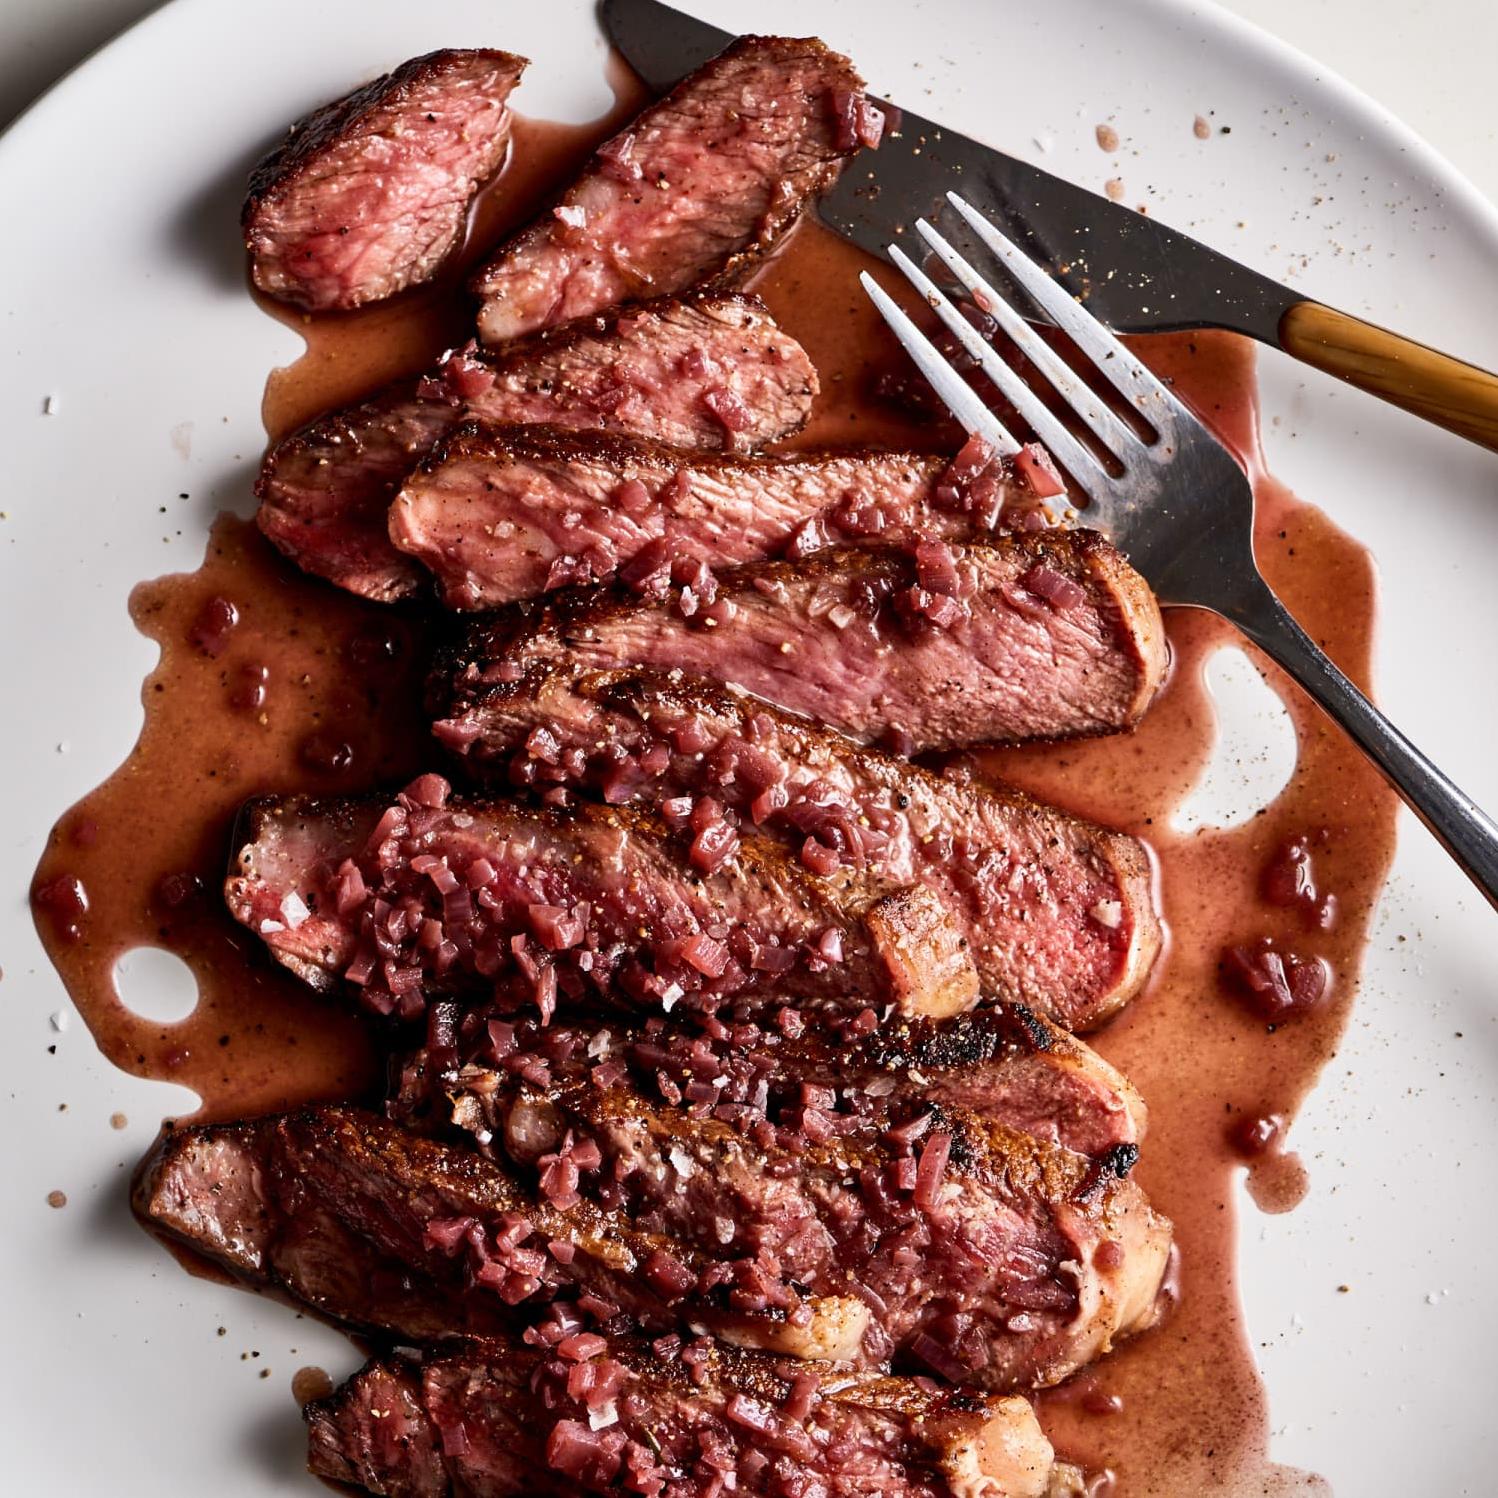  Savor the rich flavors of this tender beef filet with a luscious wine sauce.